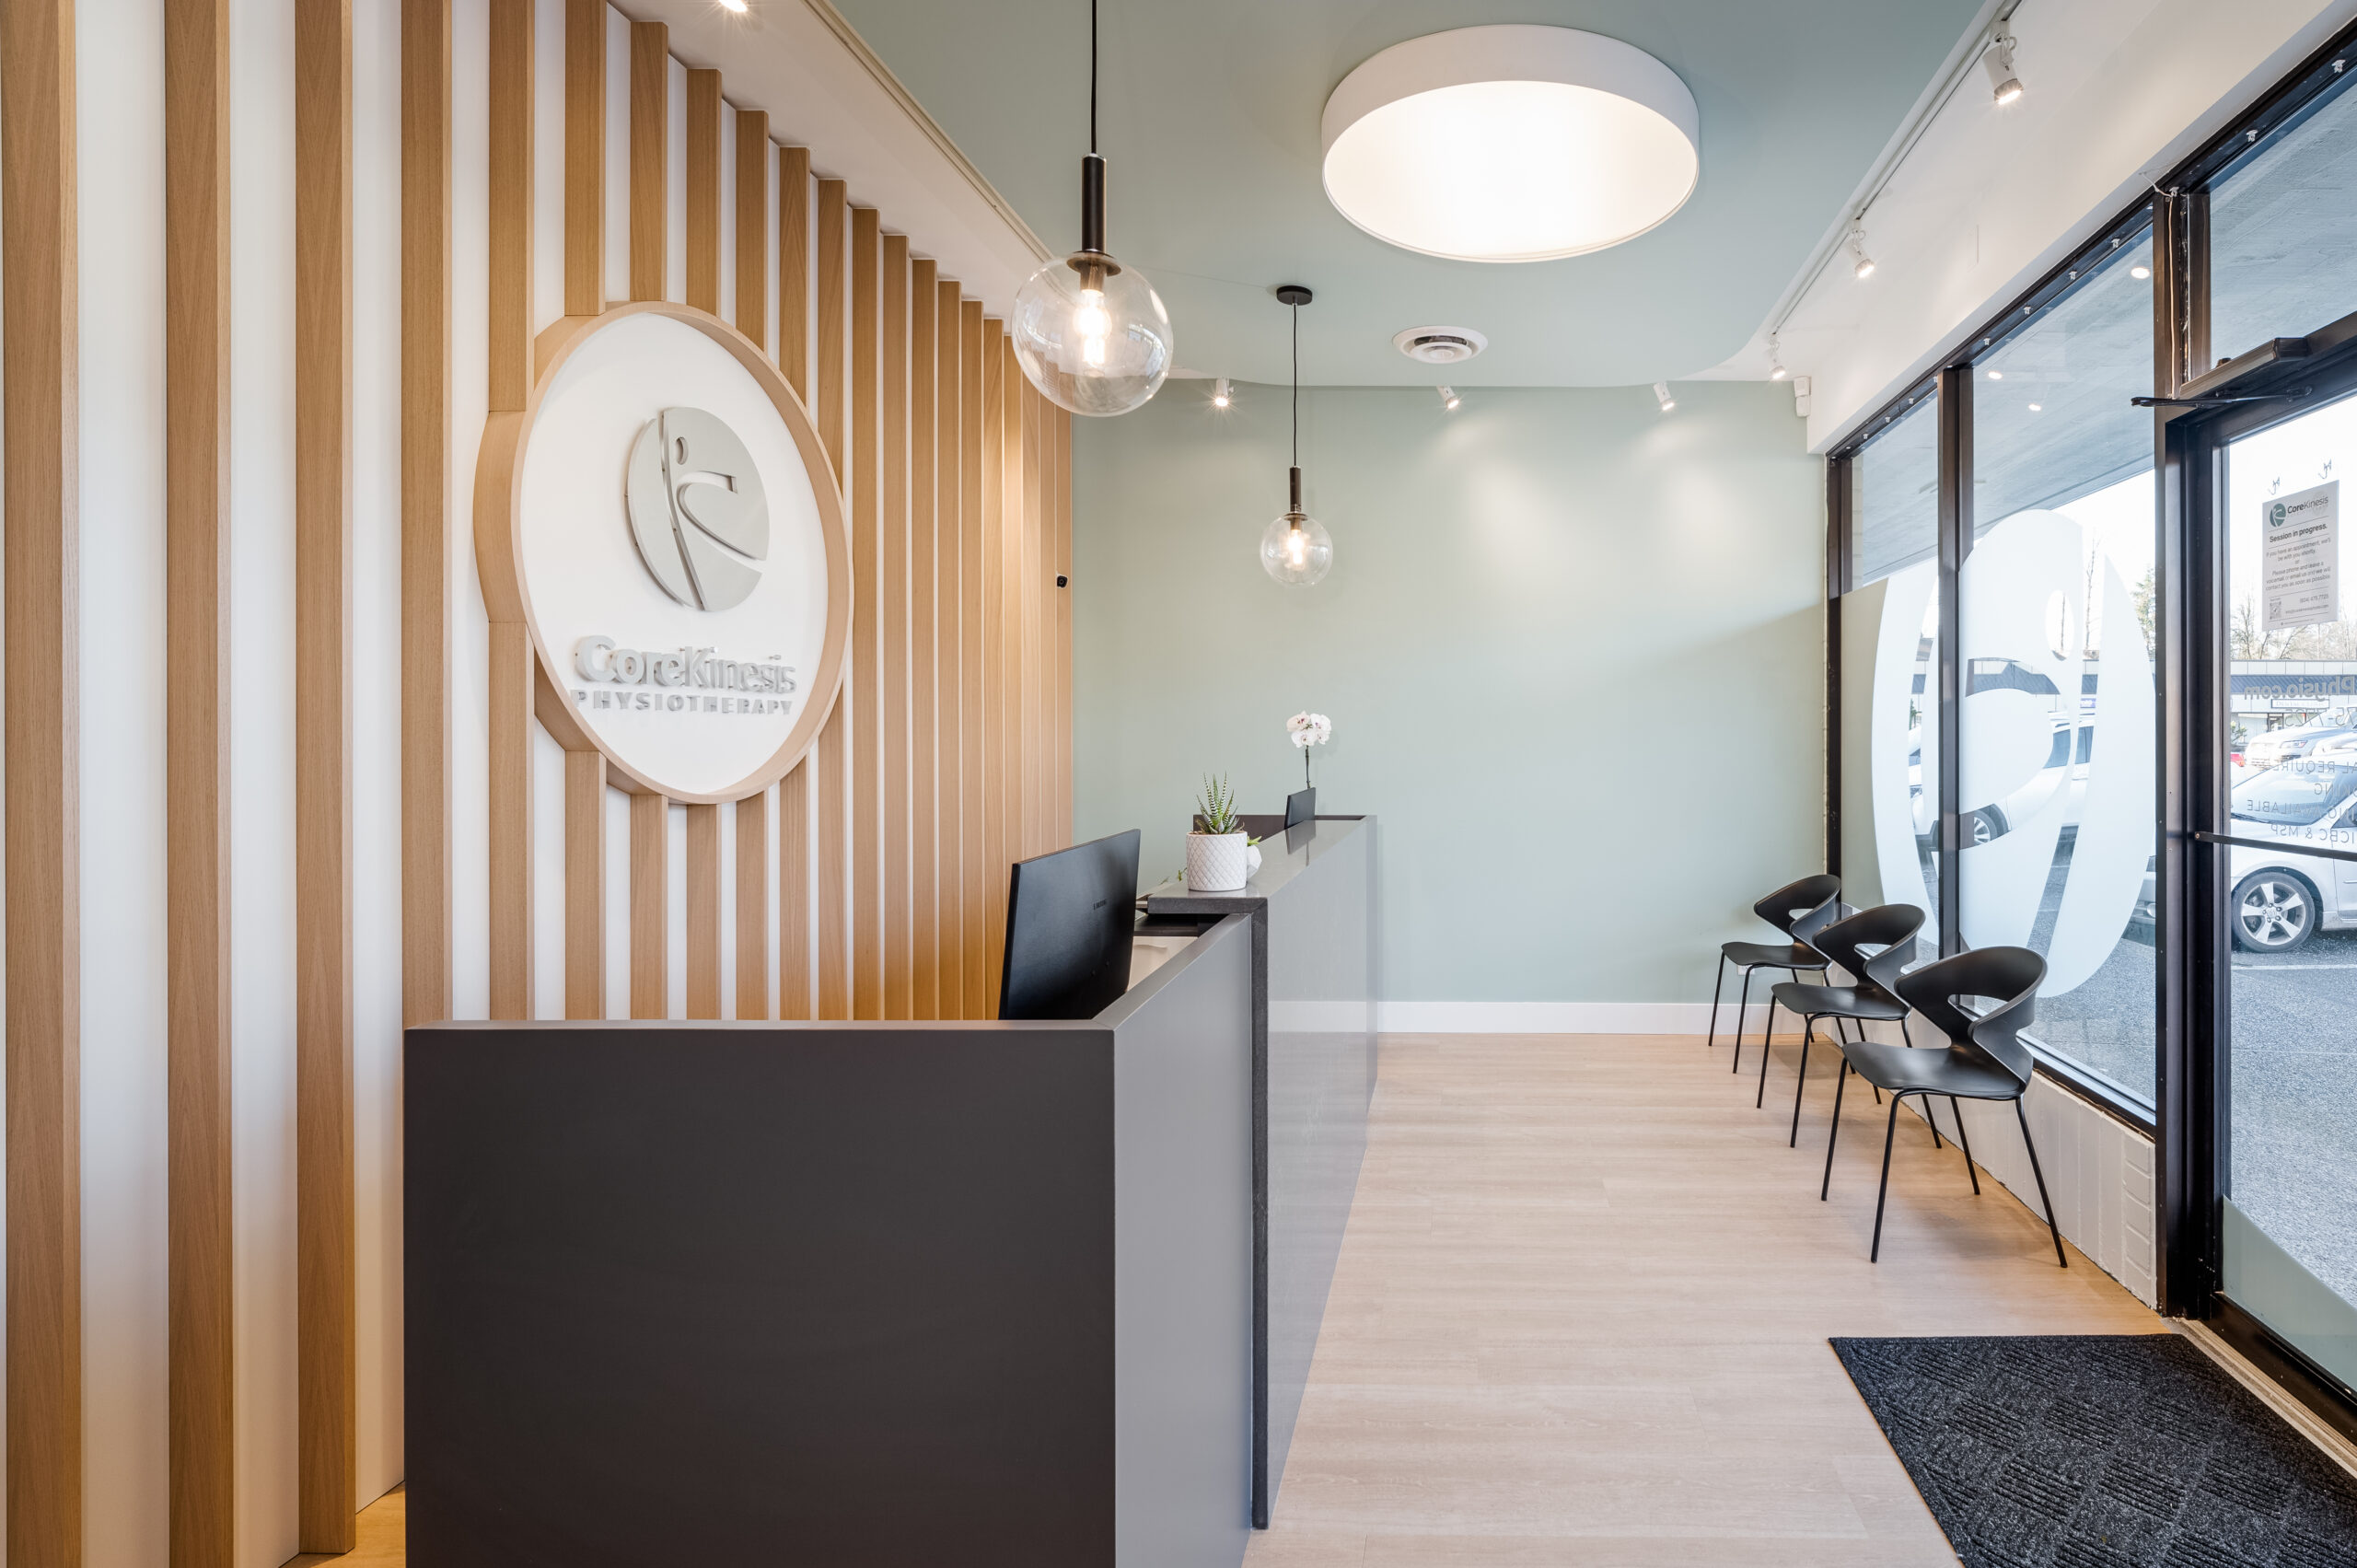 Reception at Core Kinesis Physiotherapy. Has seating for patients with wooden slats and logo on back feature wall